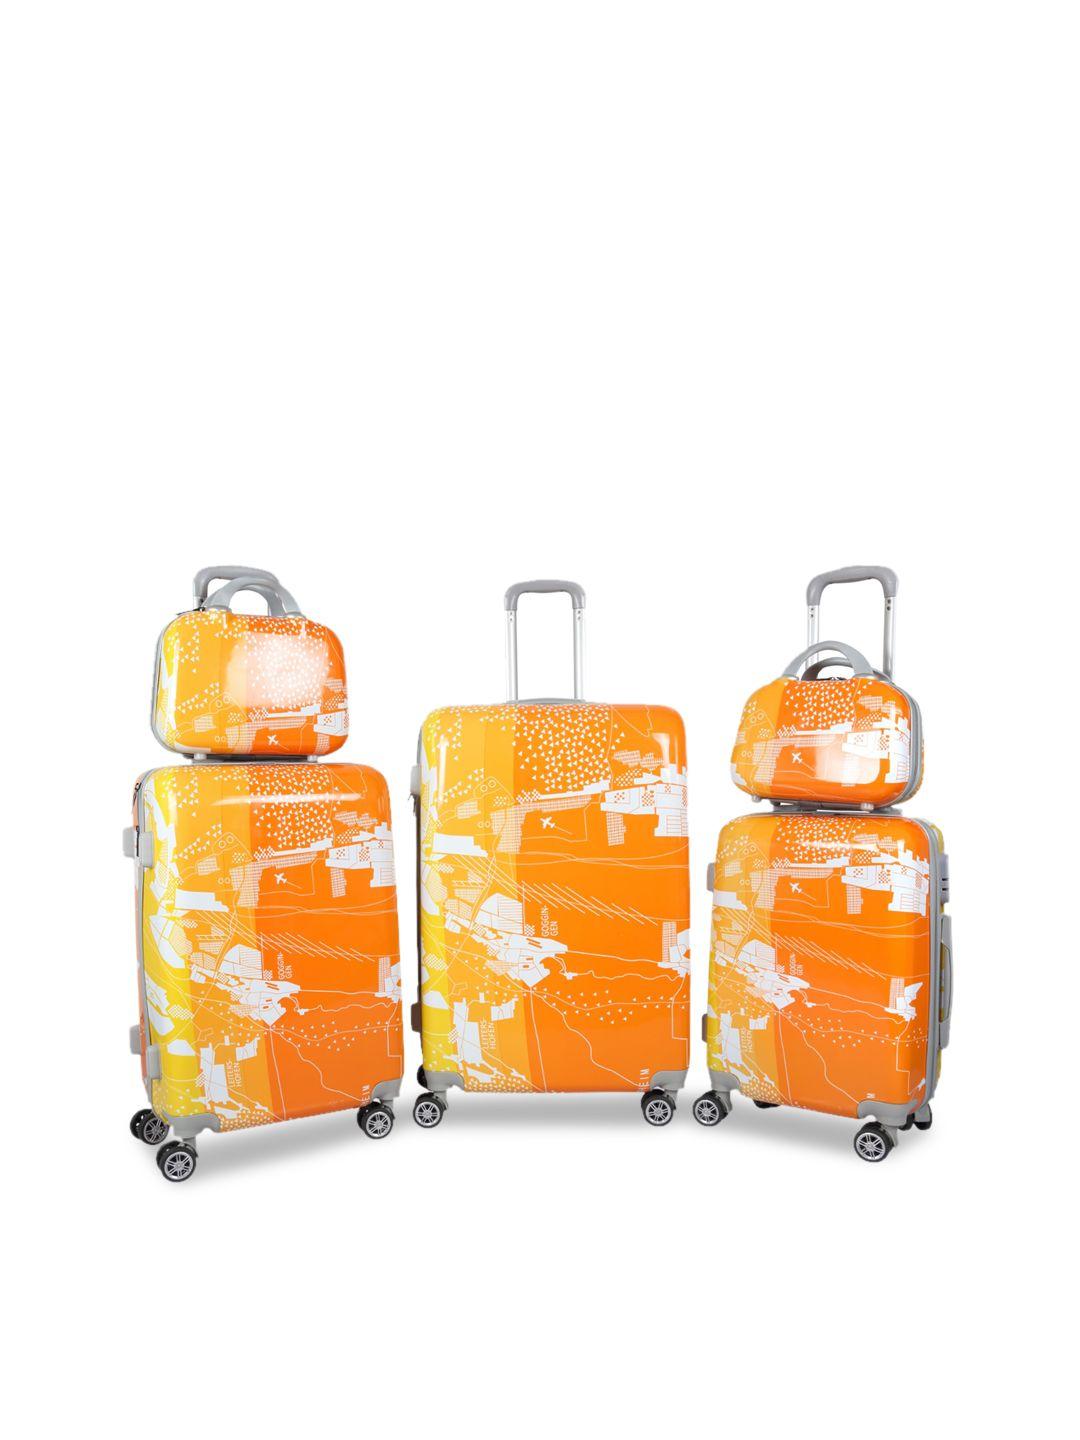 polo class orange 3pc set trolley bag luggage suitcases with 2pc vanity bag